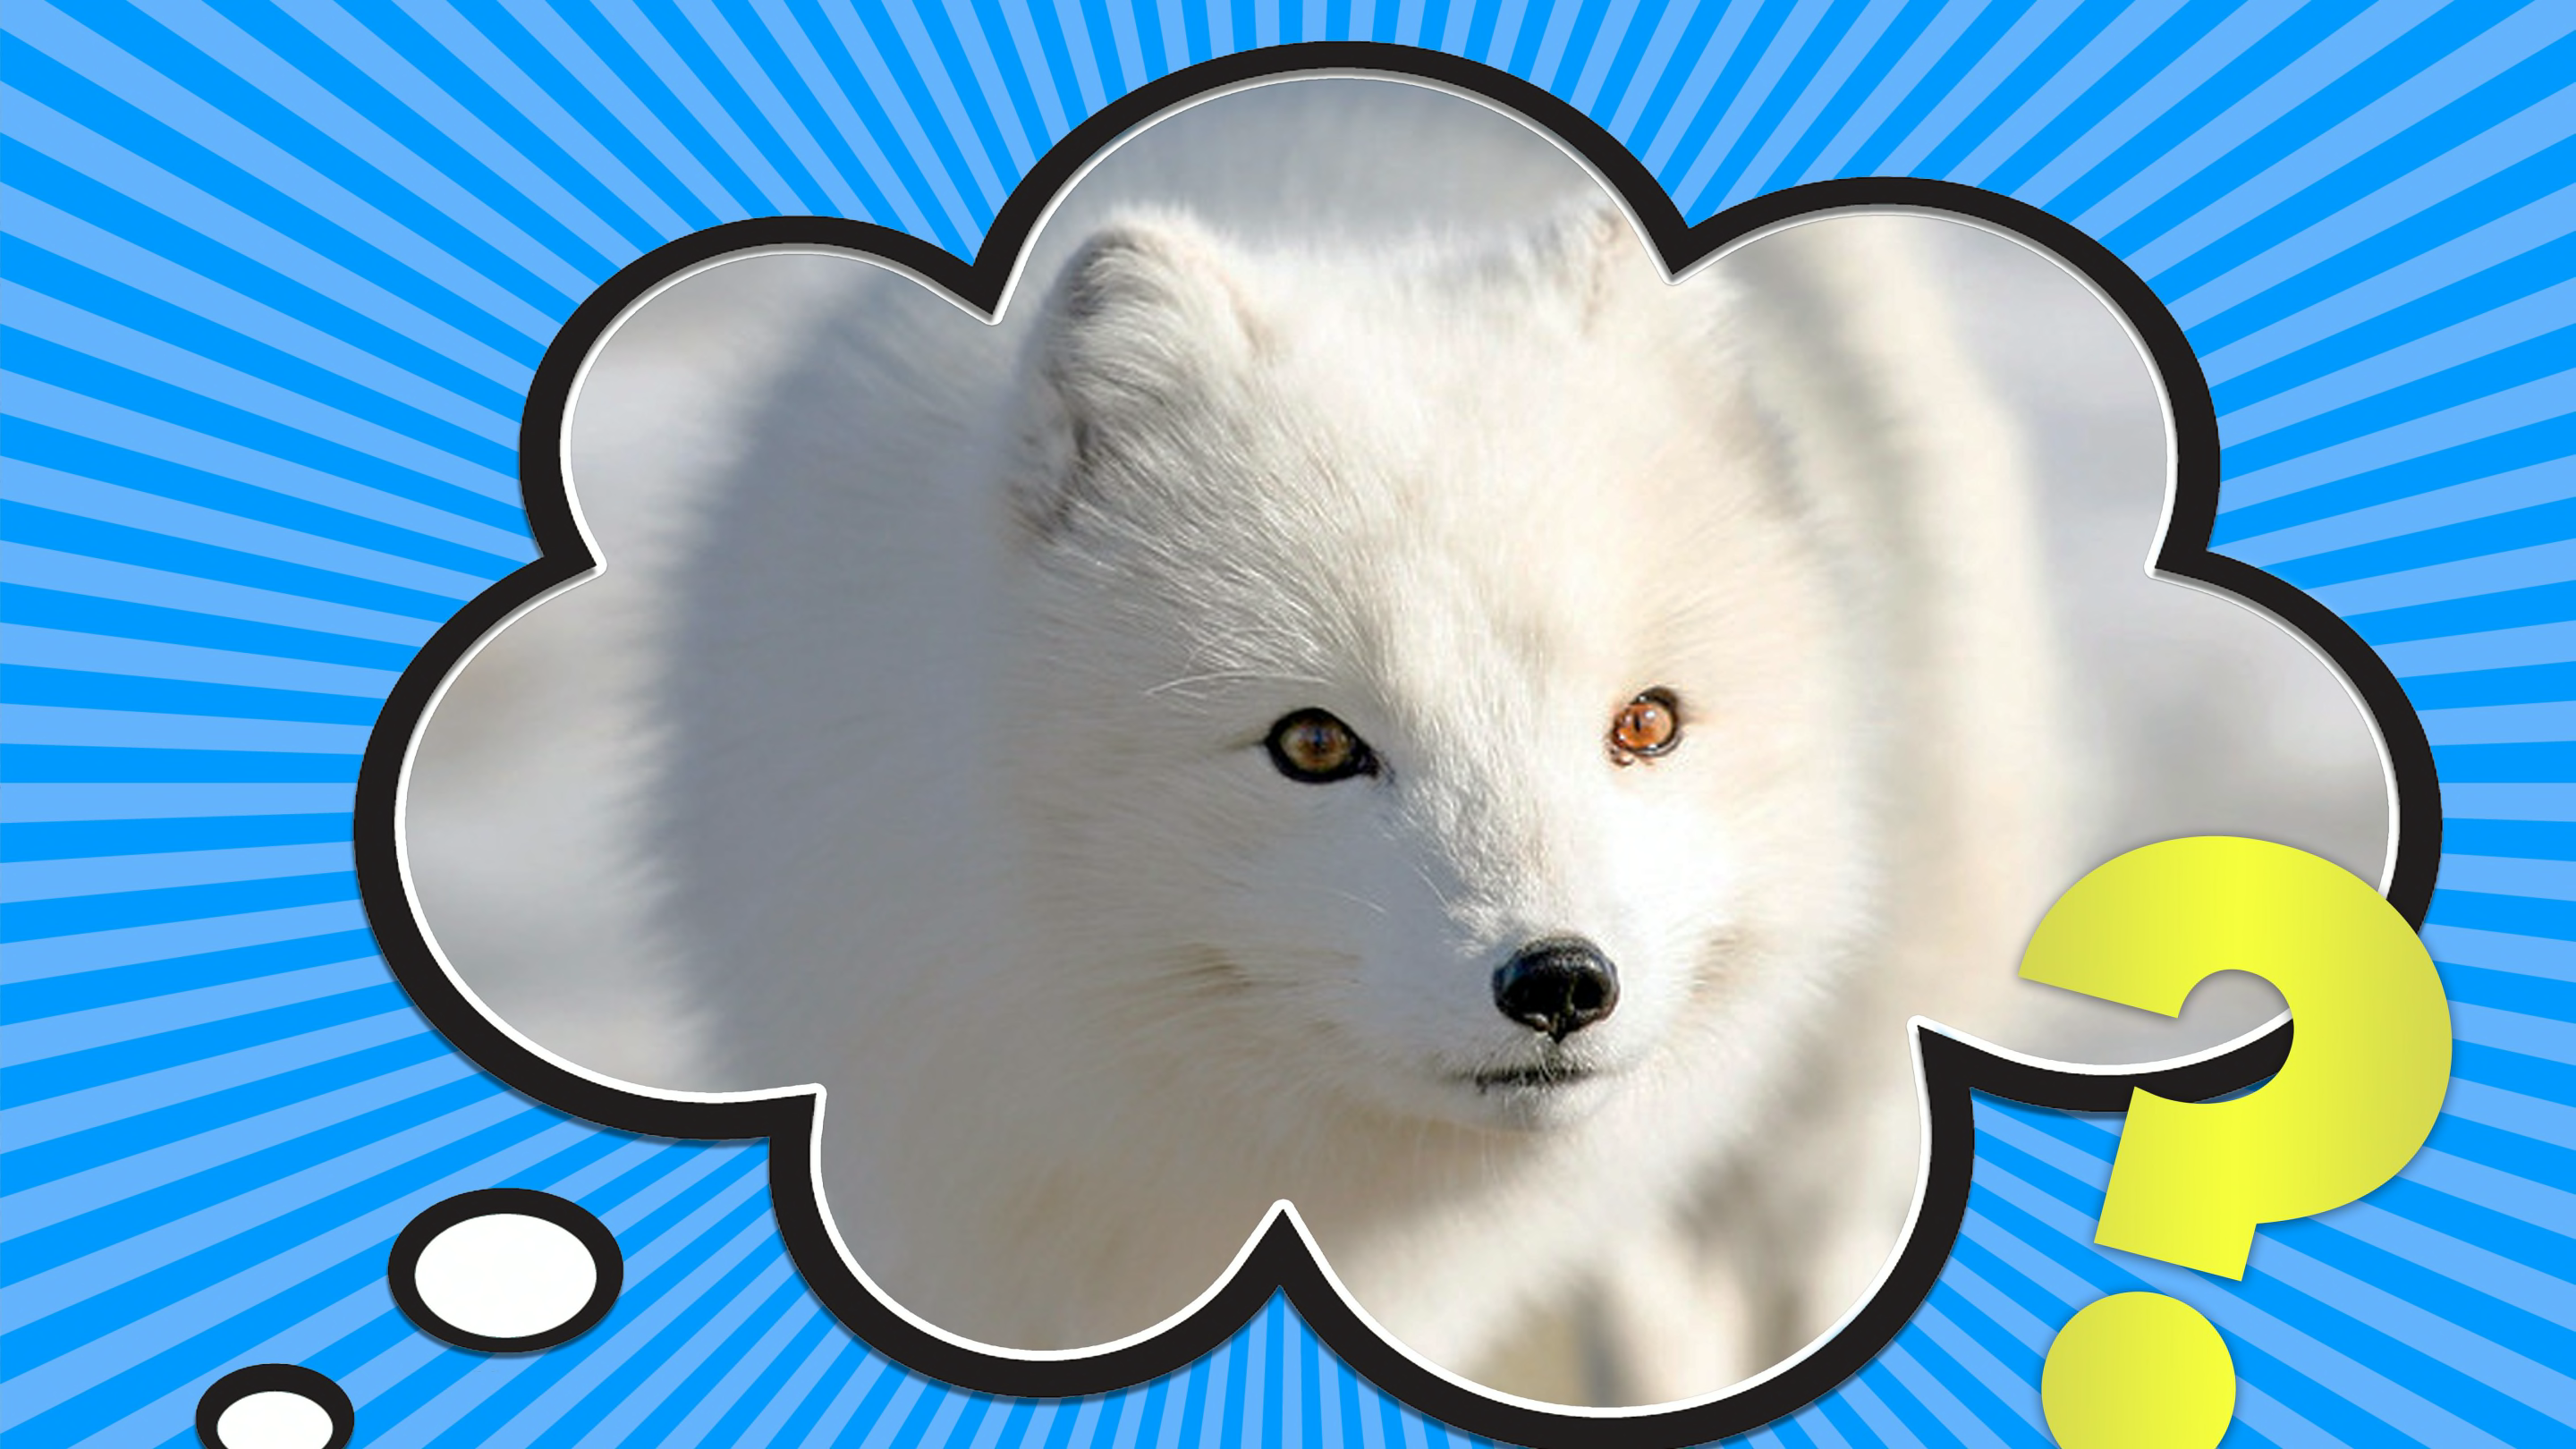 What Do Arctic Foxes Eat?